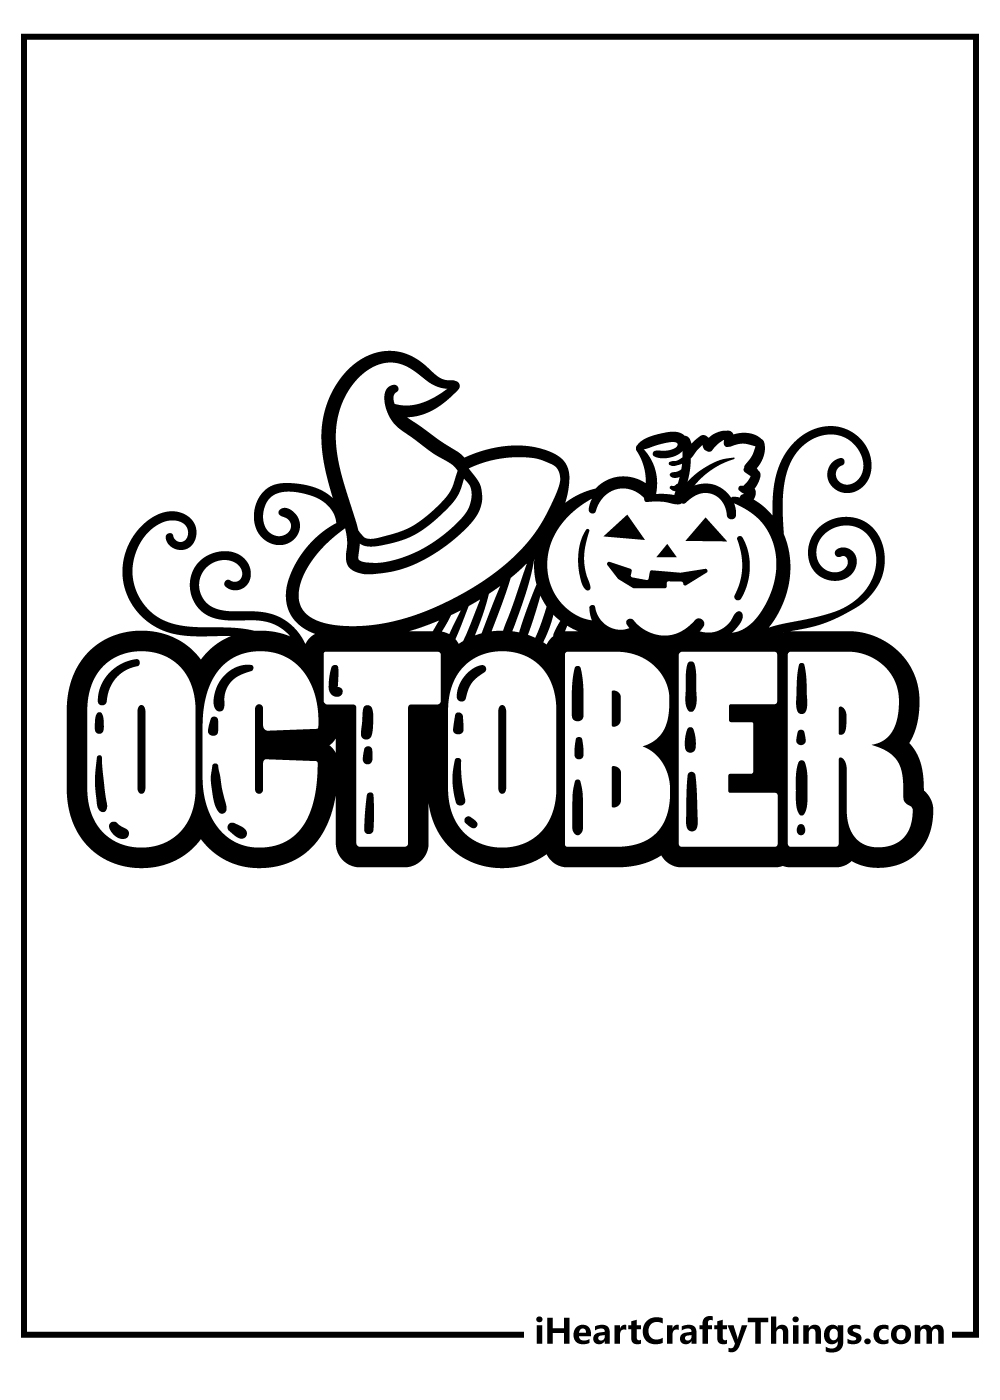 October Coloring Pages for adults free printable